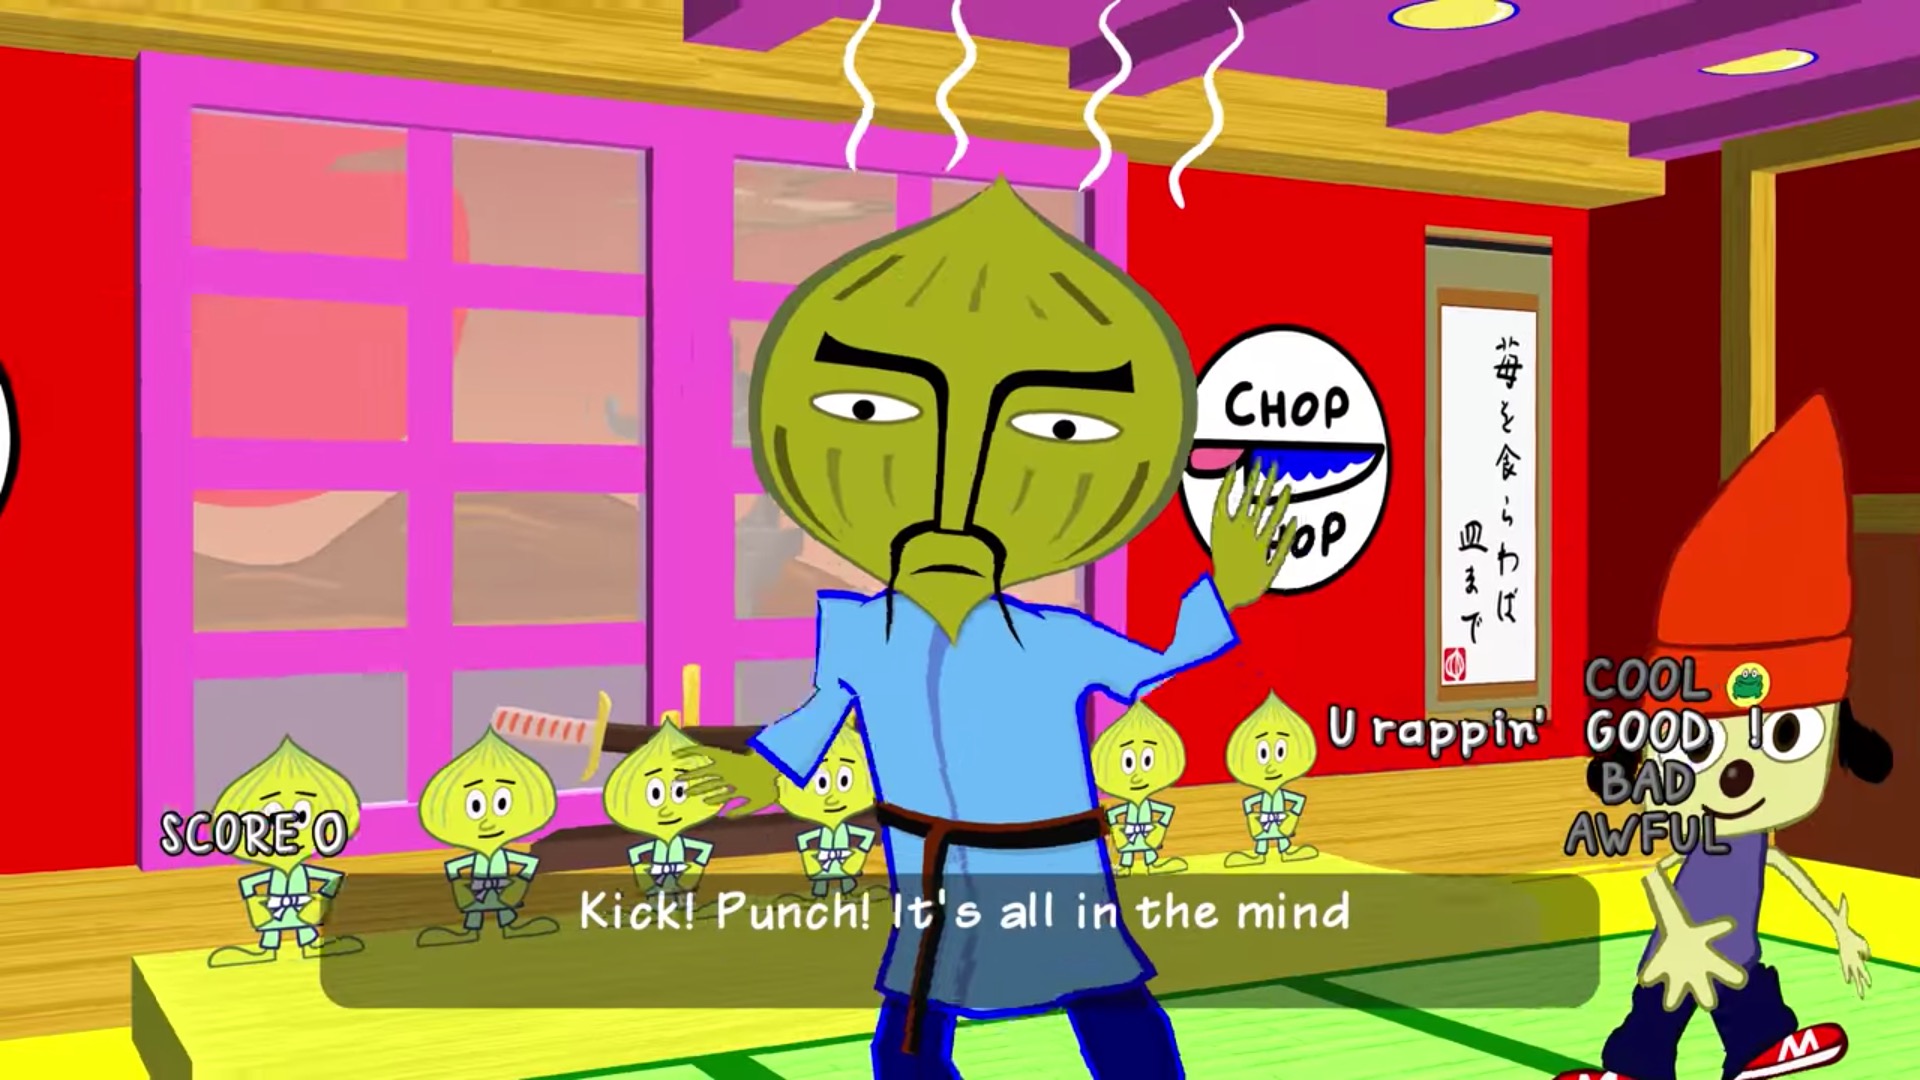 How to get COOL rating EASY in Parappa the Rapper Remastered 